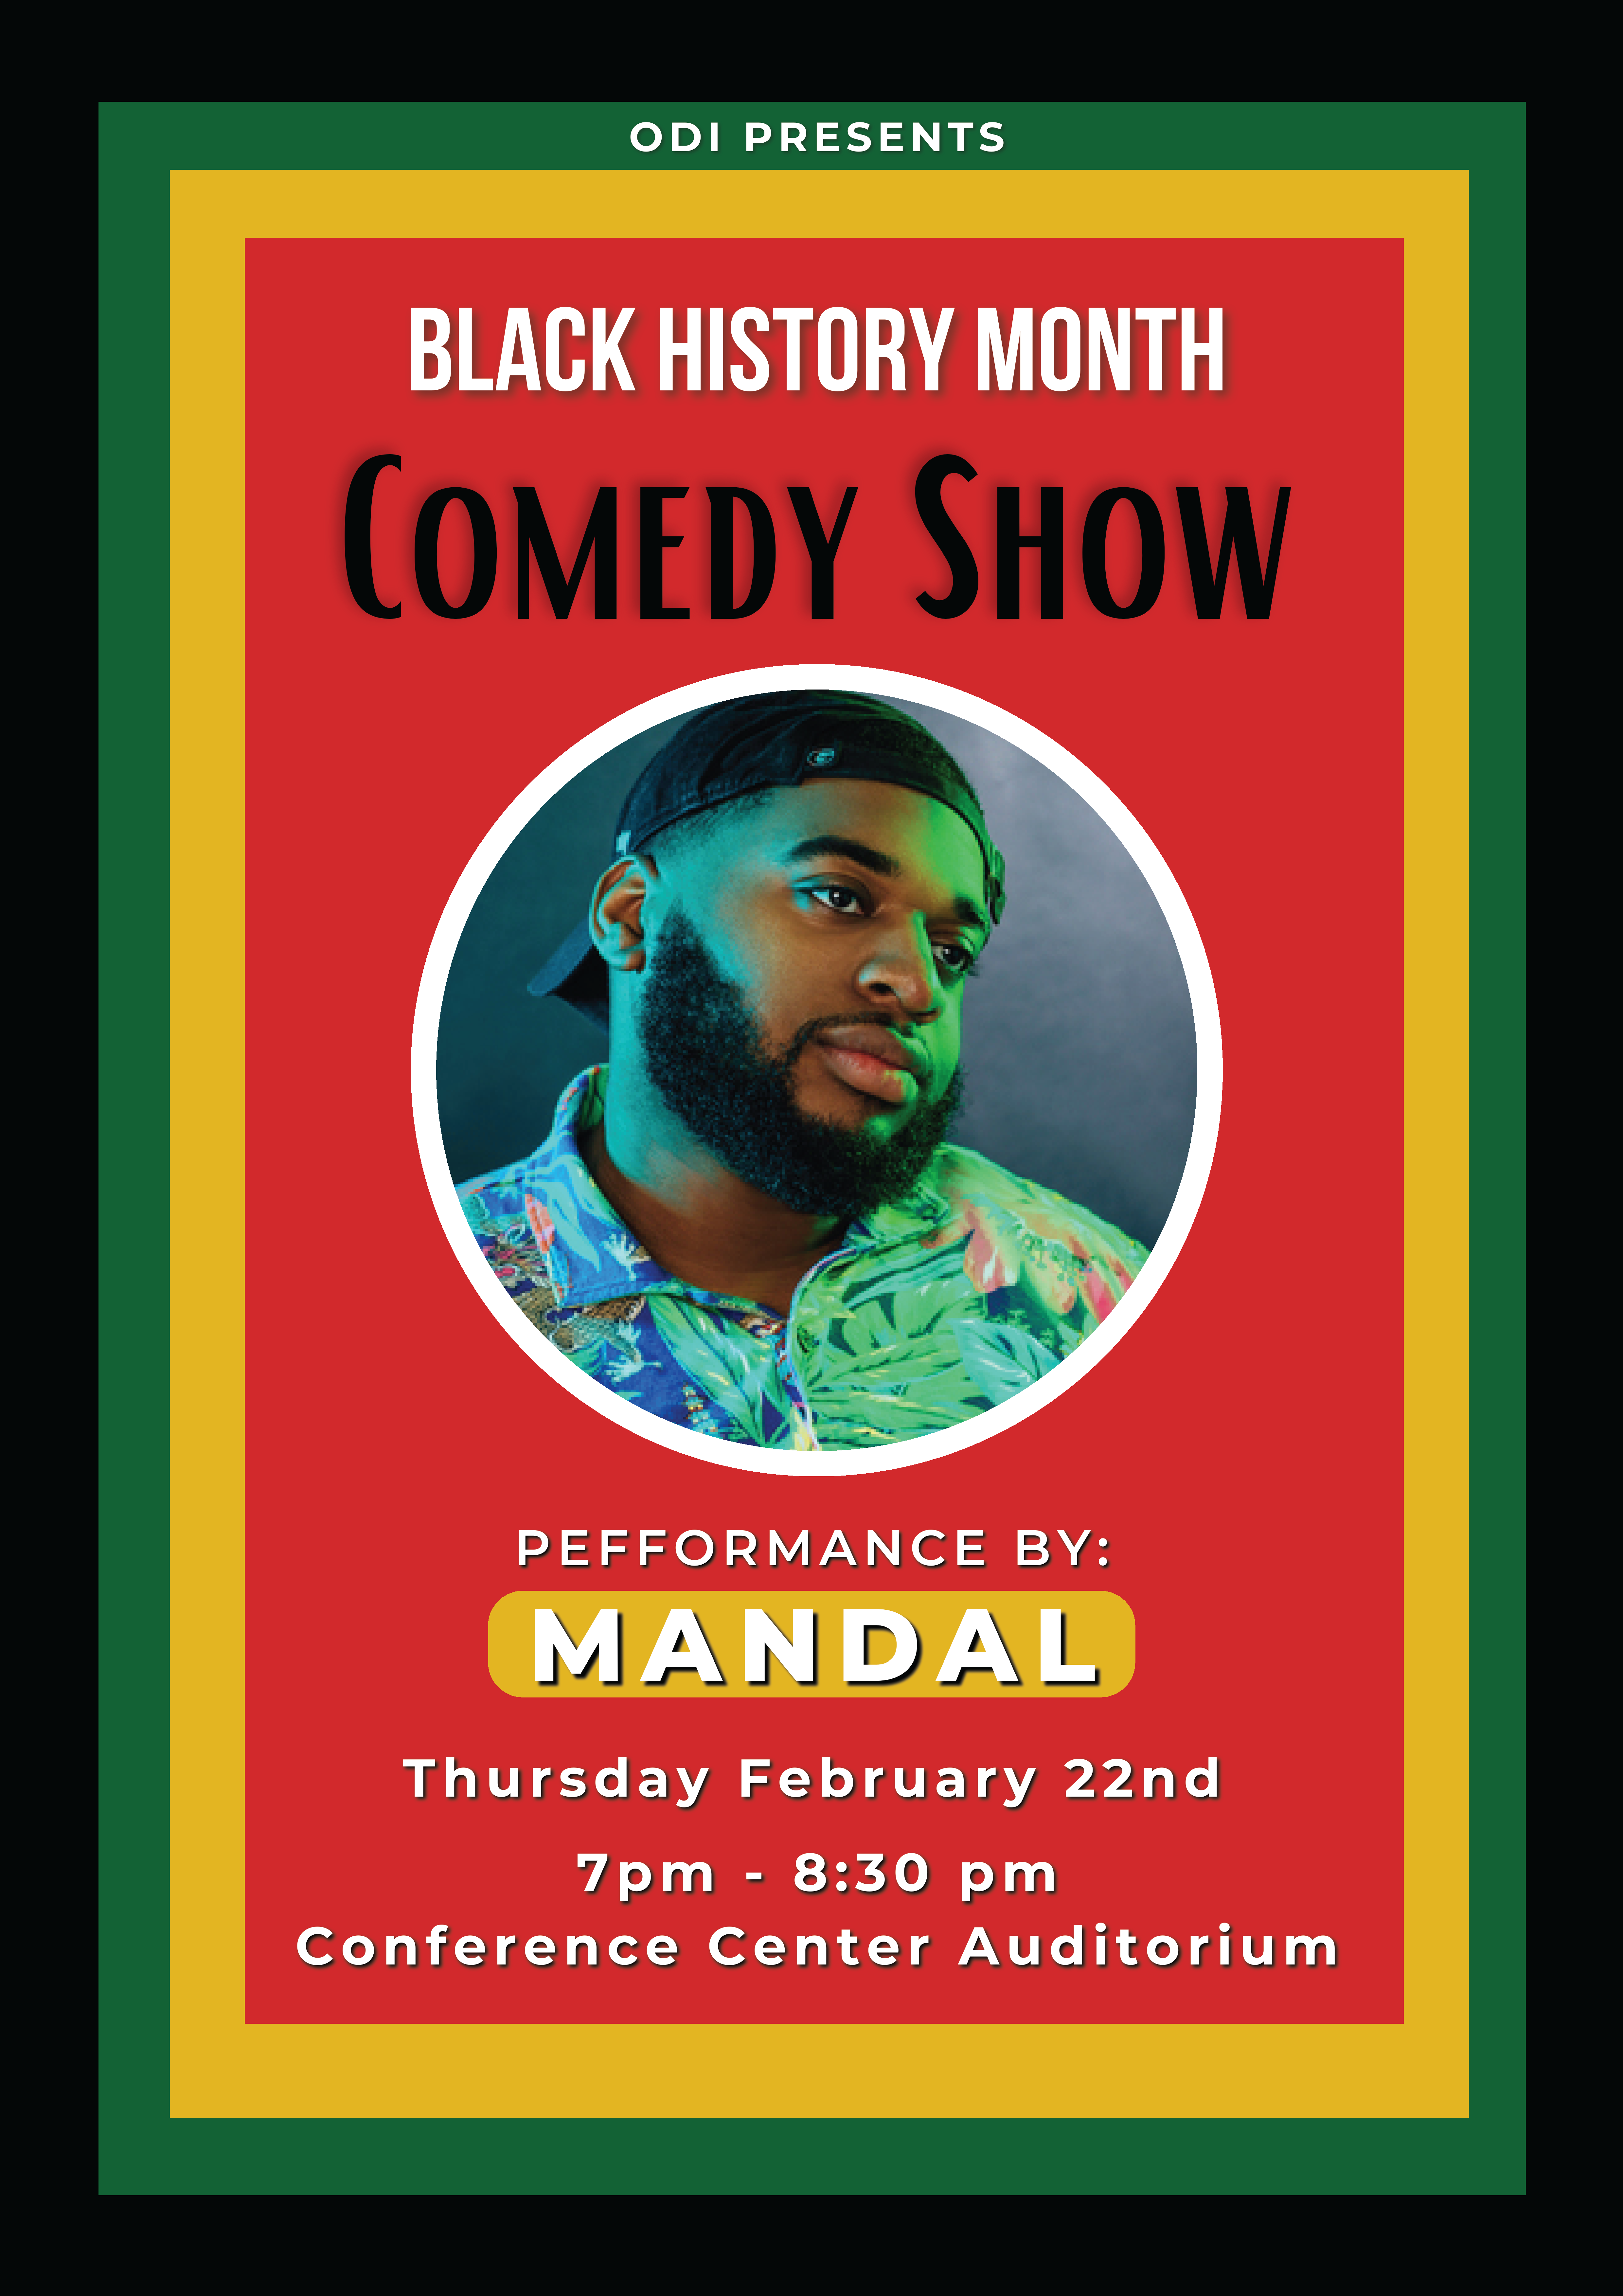 Black History Month Comedy Show